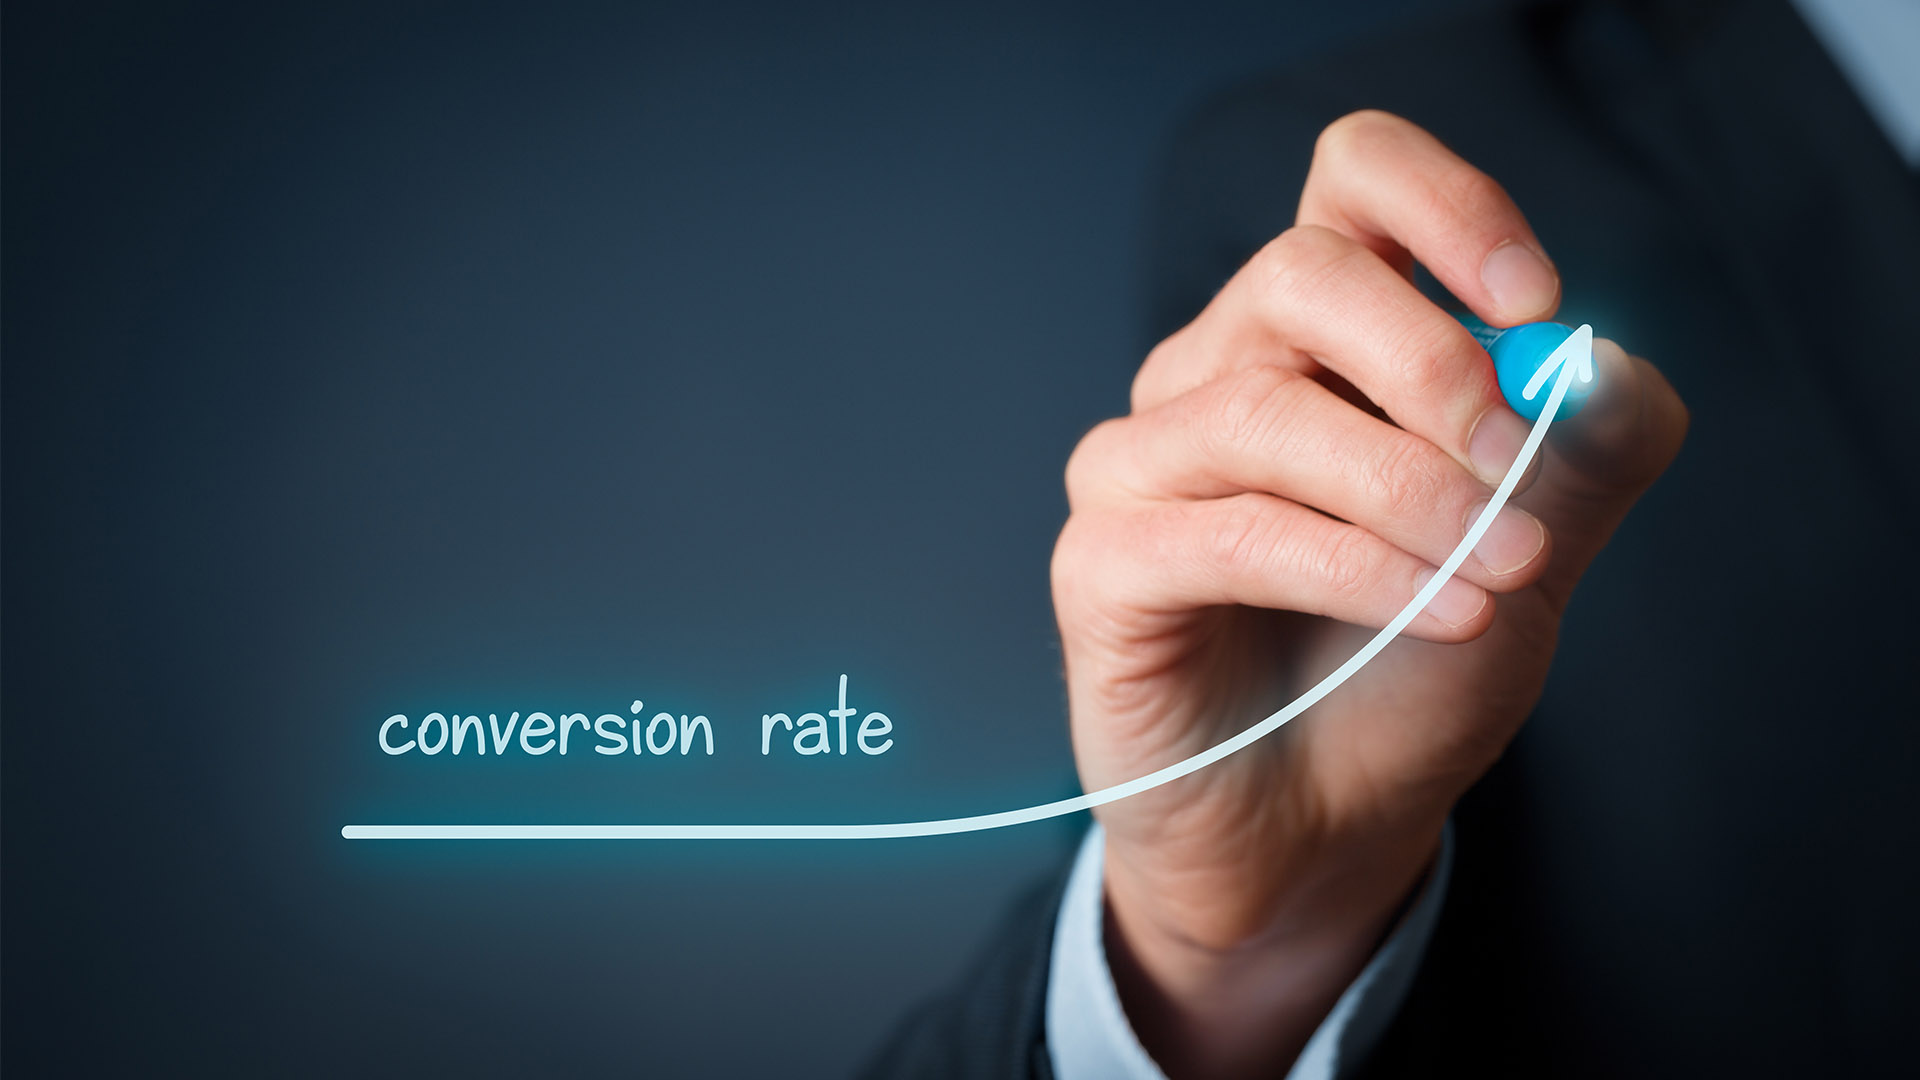 Increase the conversion rate